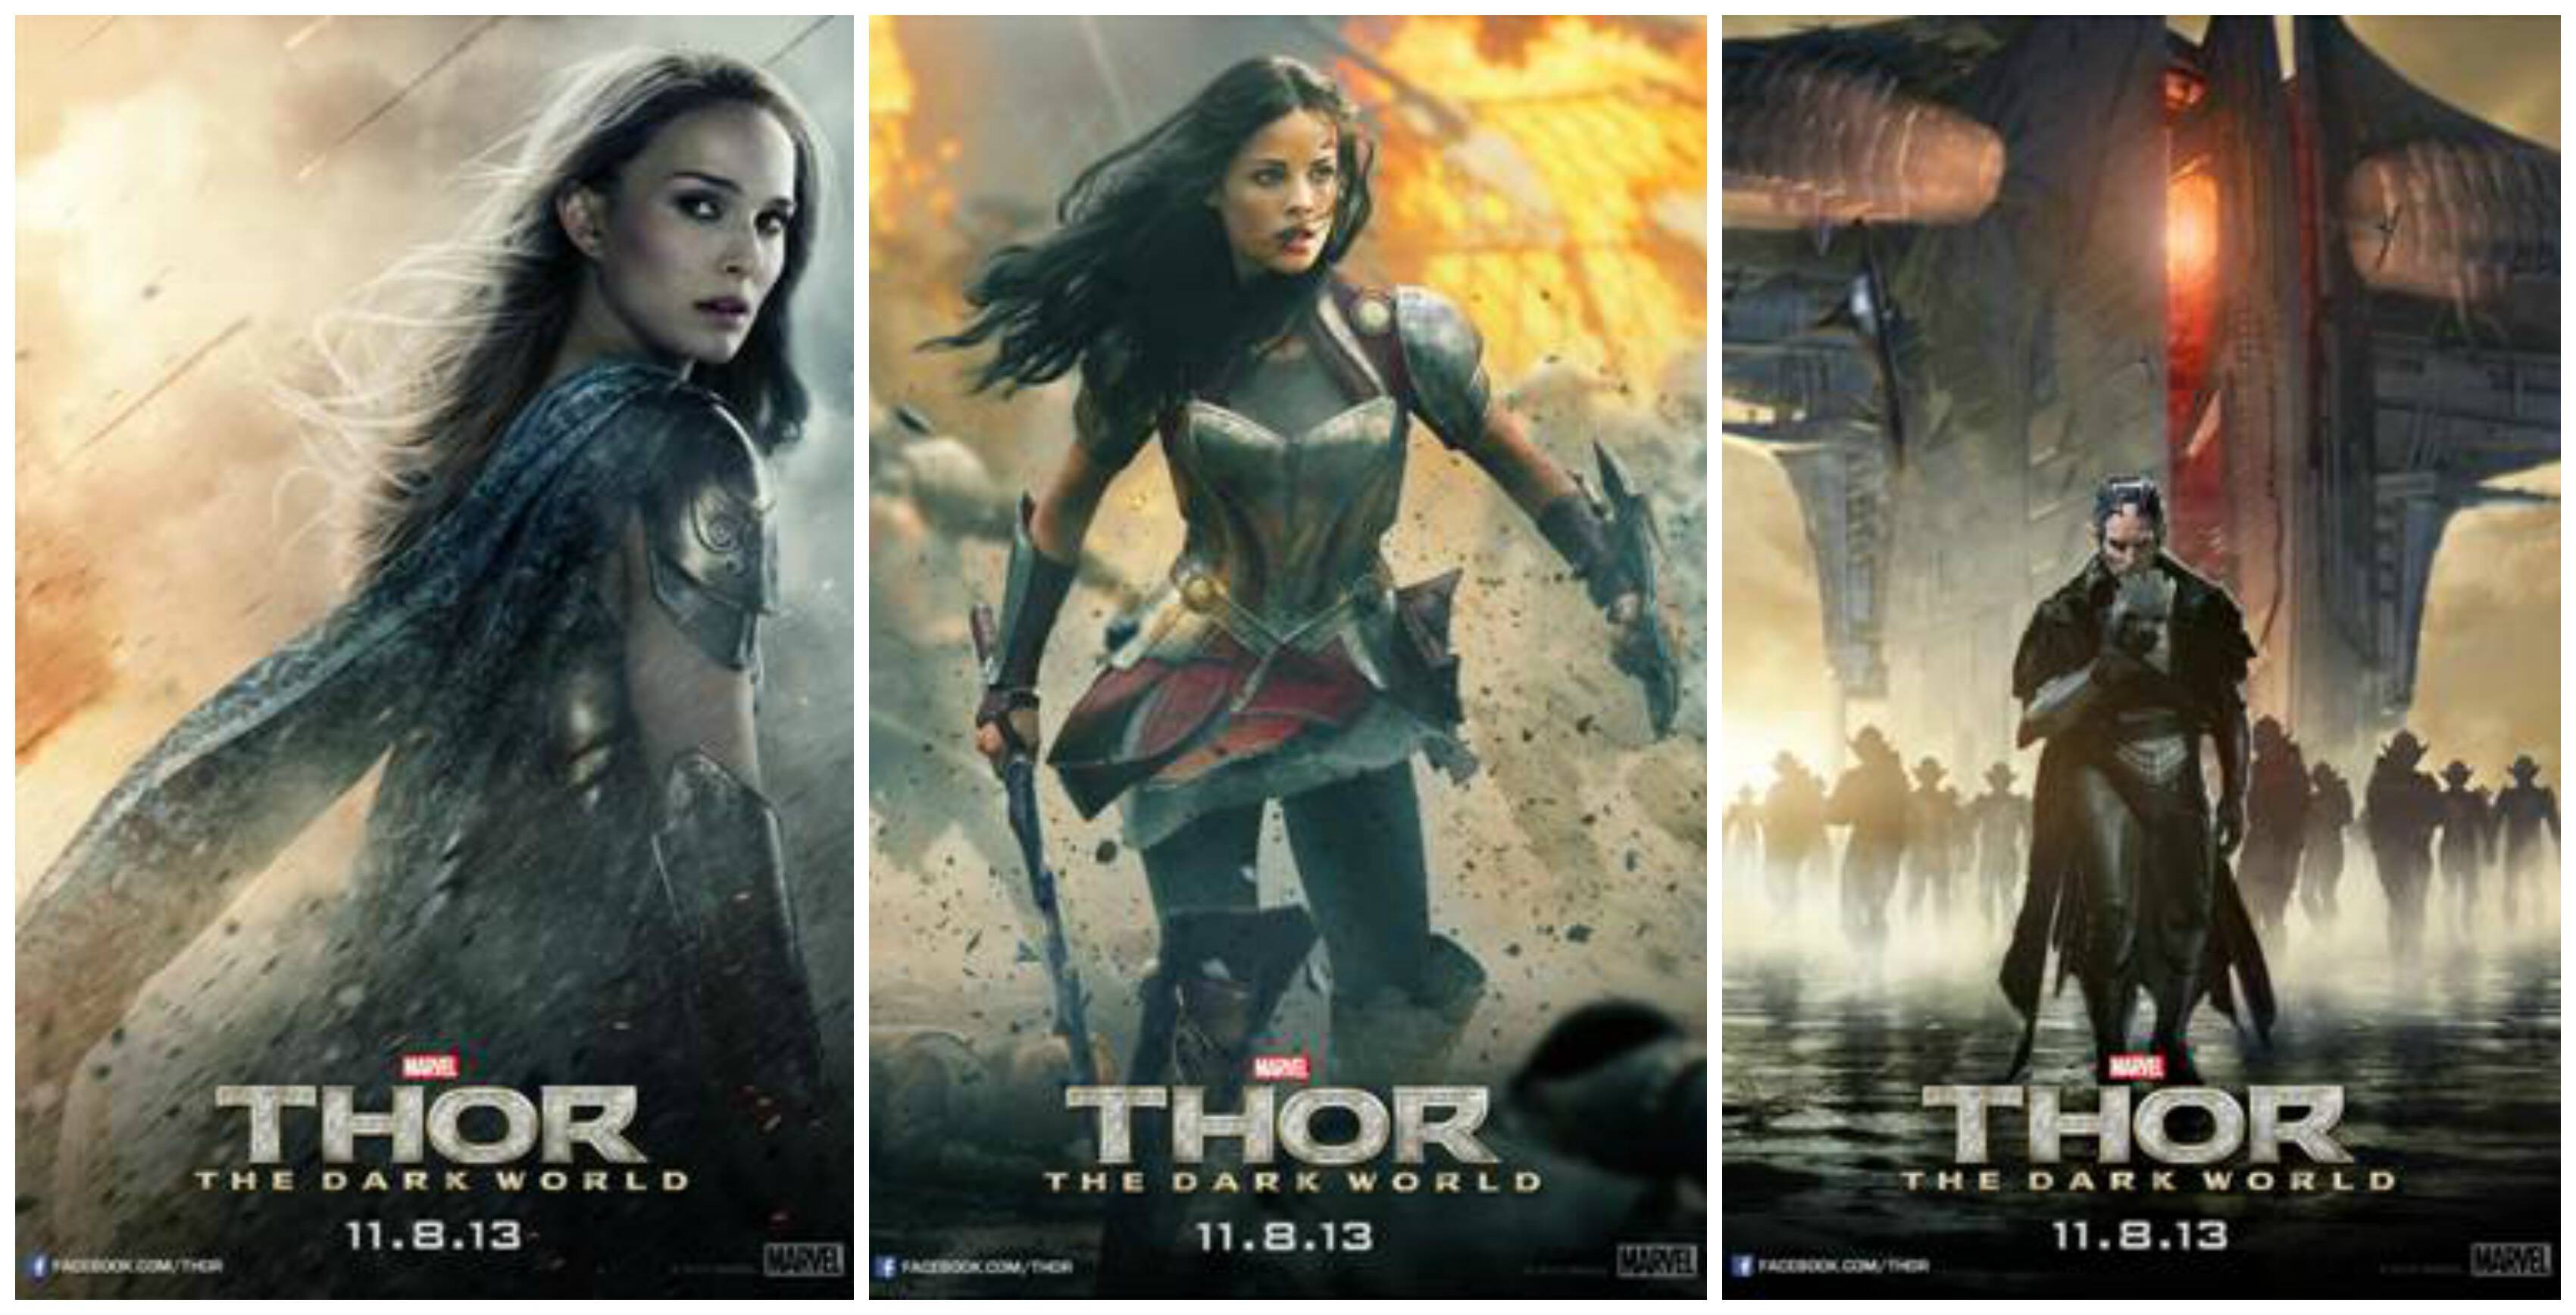 THor Posters